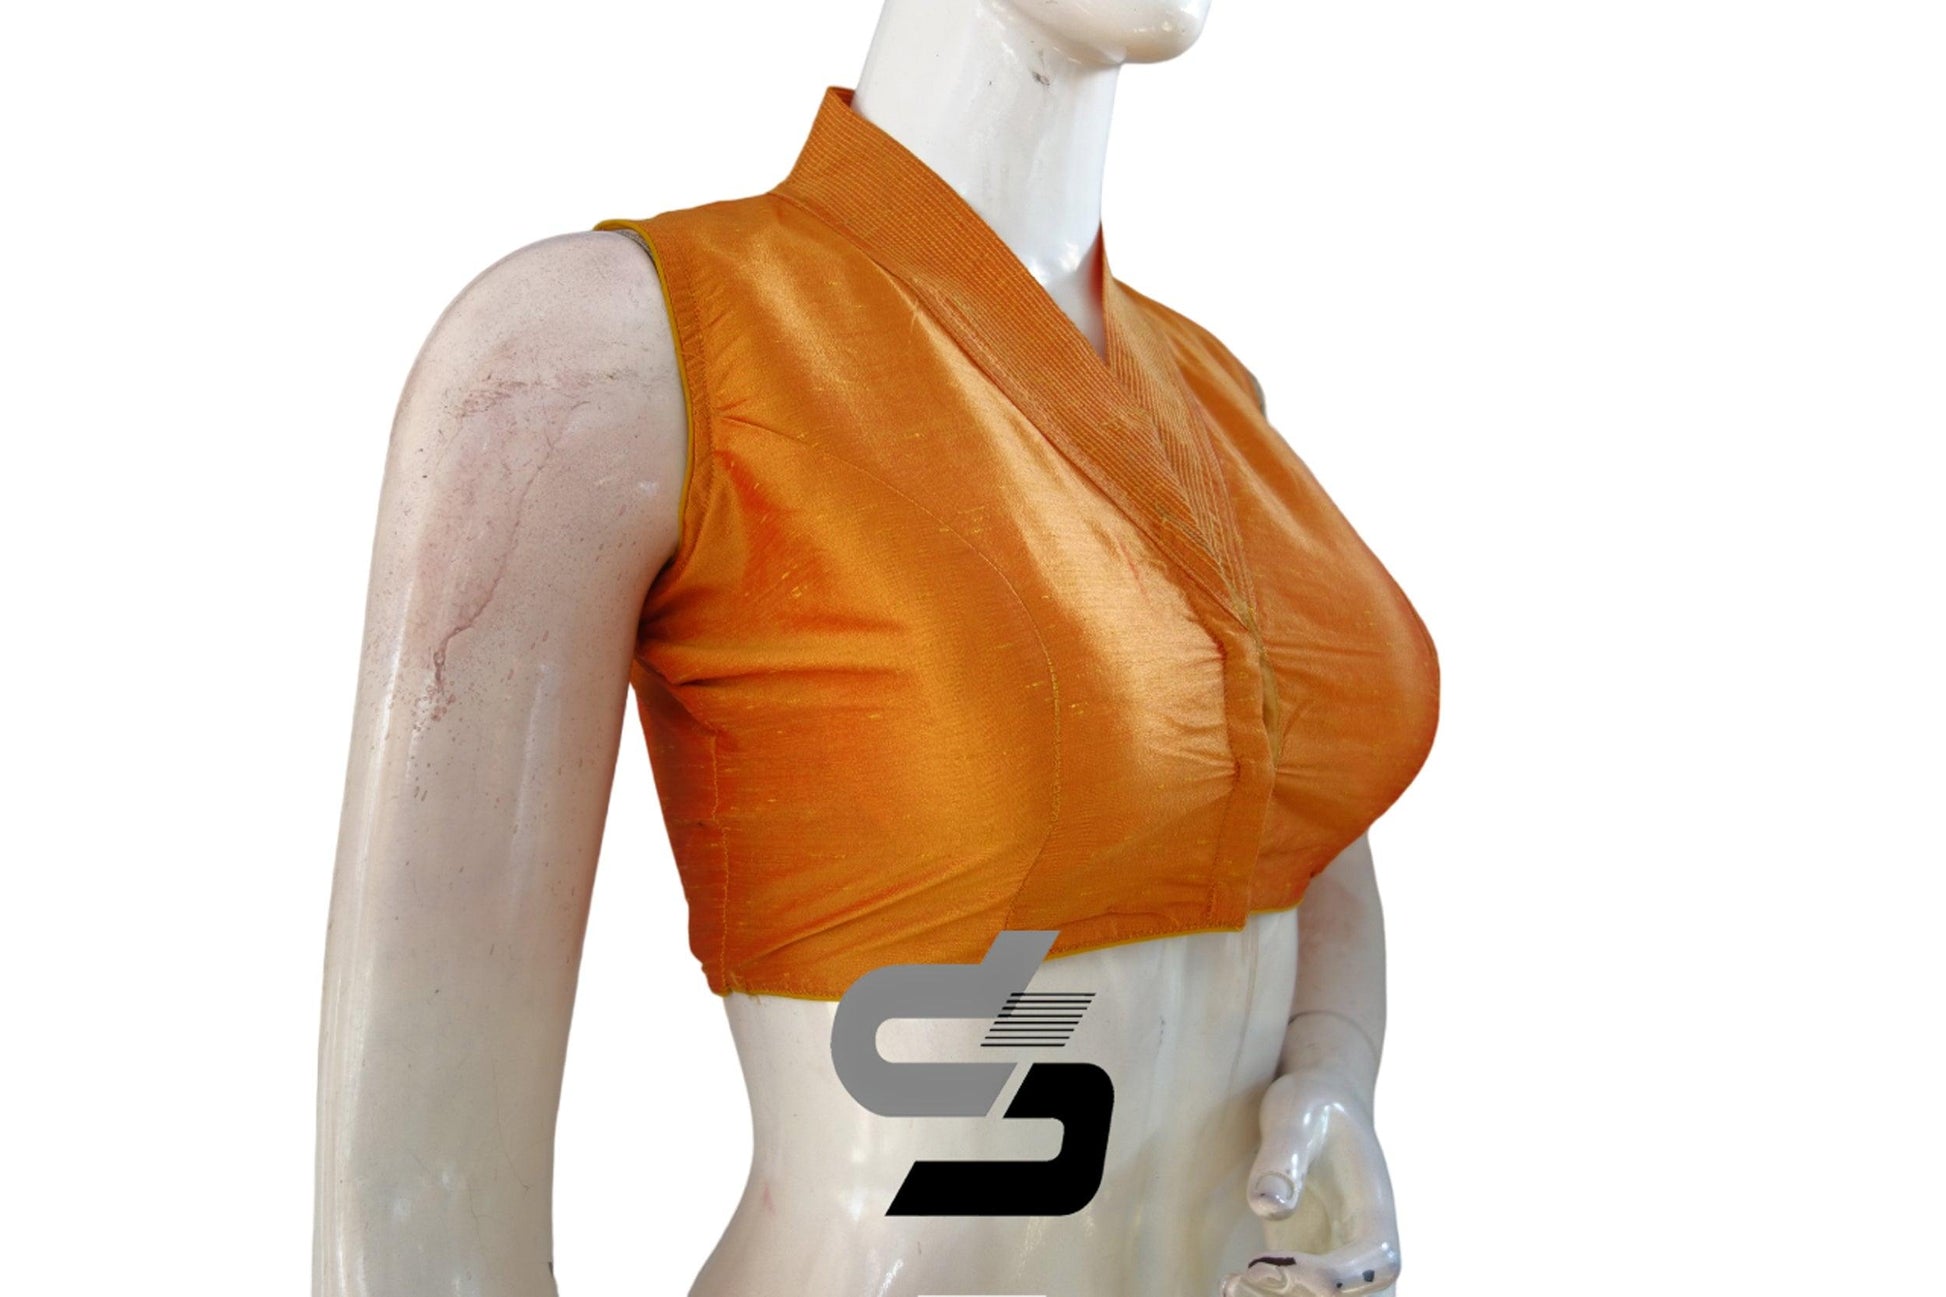 "Statement-Making Style: Ready-to-Wear Mustard Orange Sleeveless Blouse with Collar Neck" - D3blouses